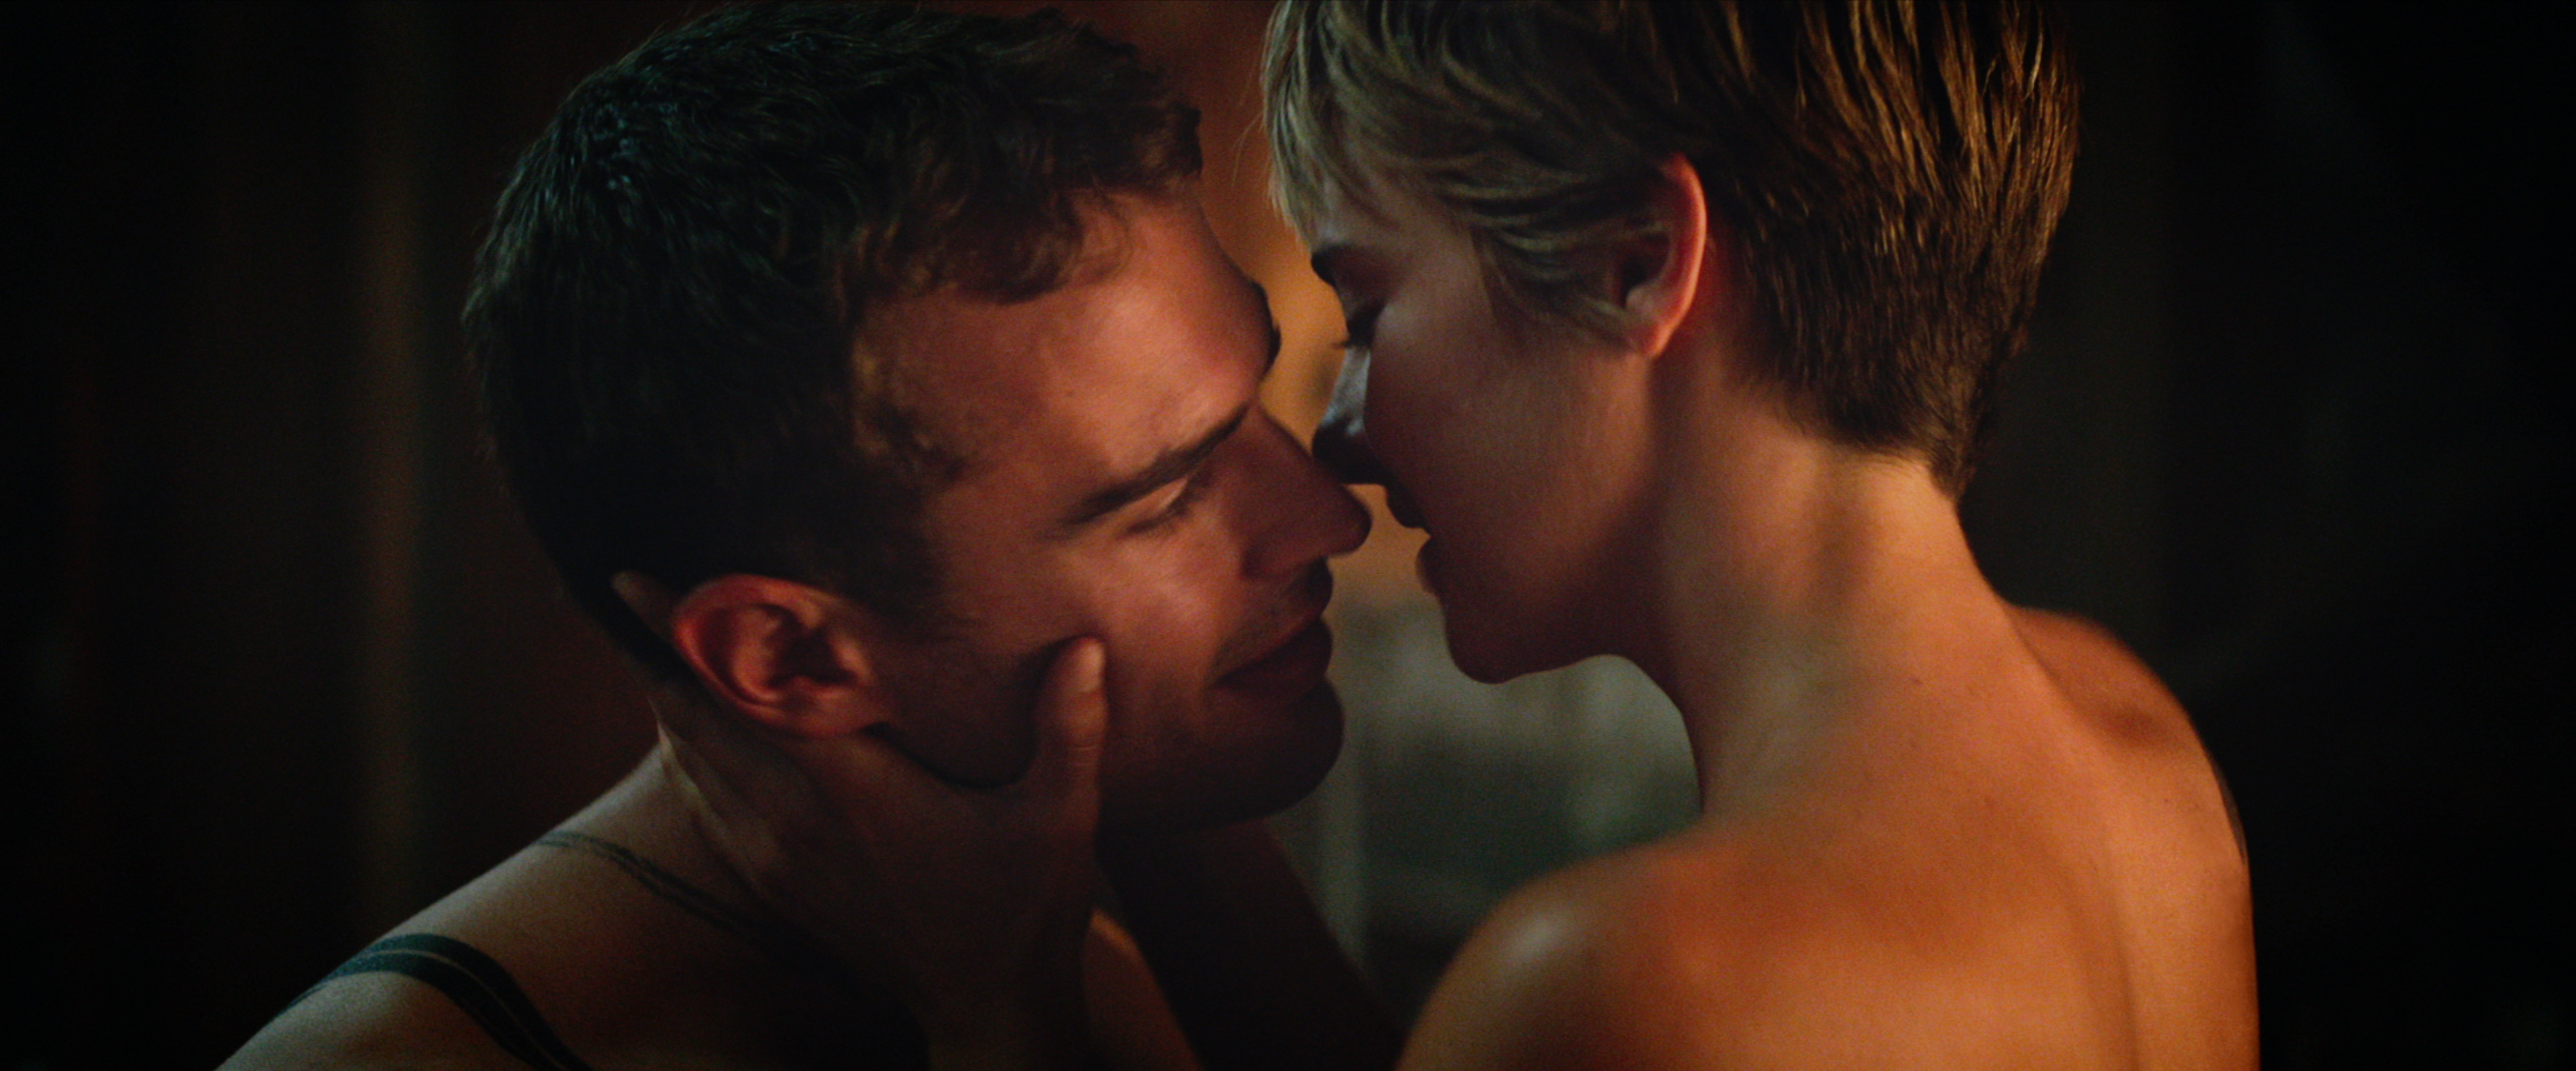 Download: Five Official Insurgent Stills in HQ